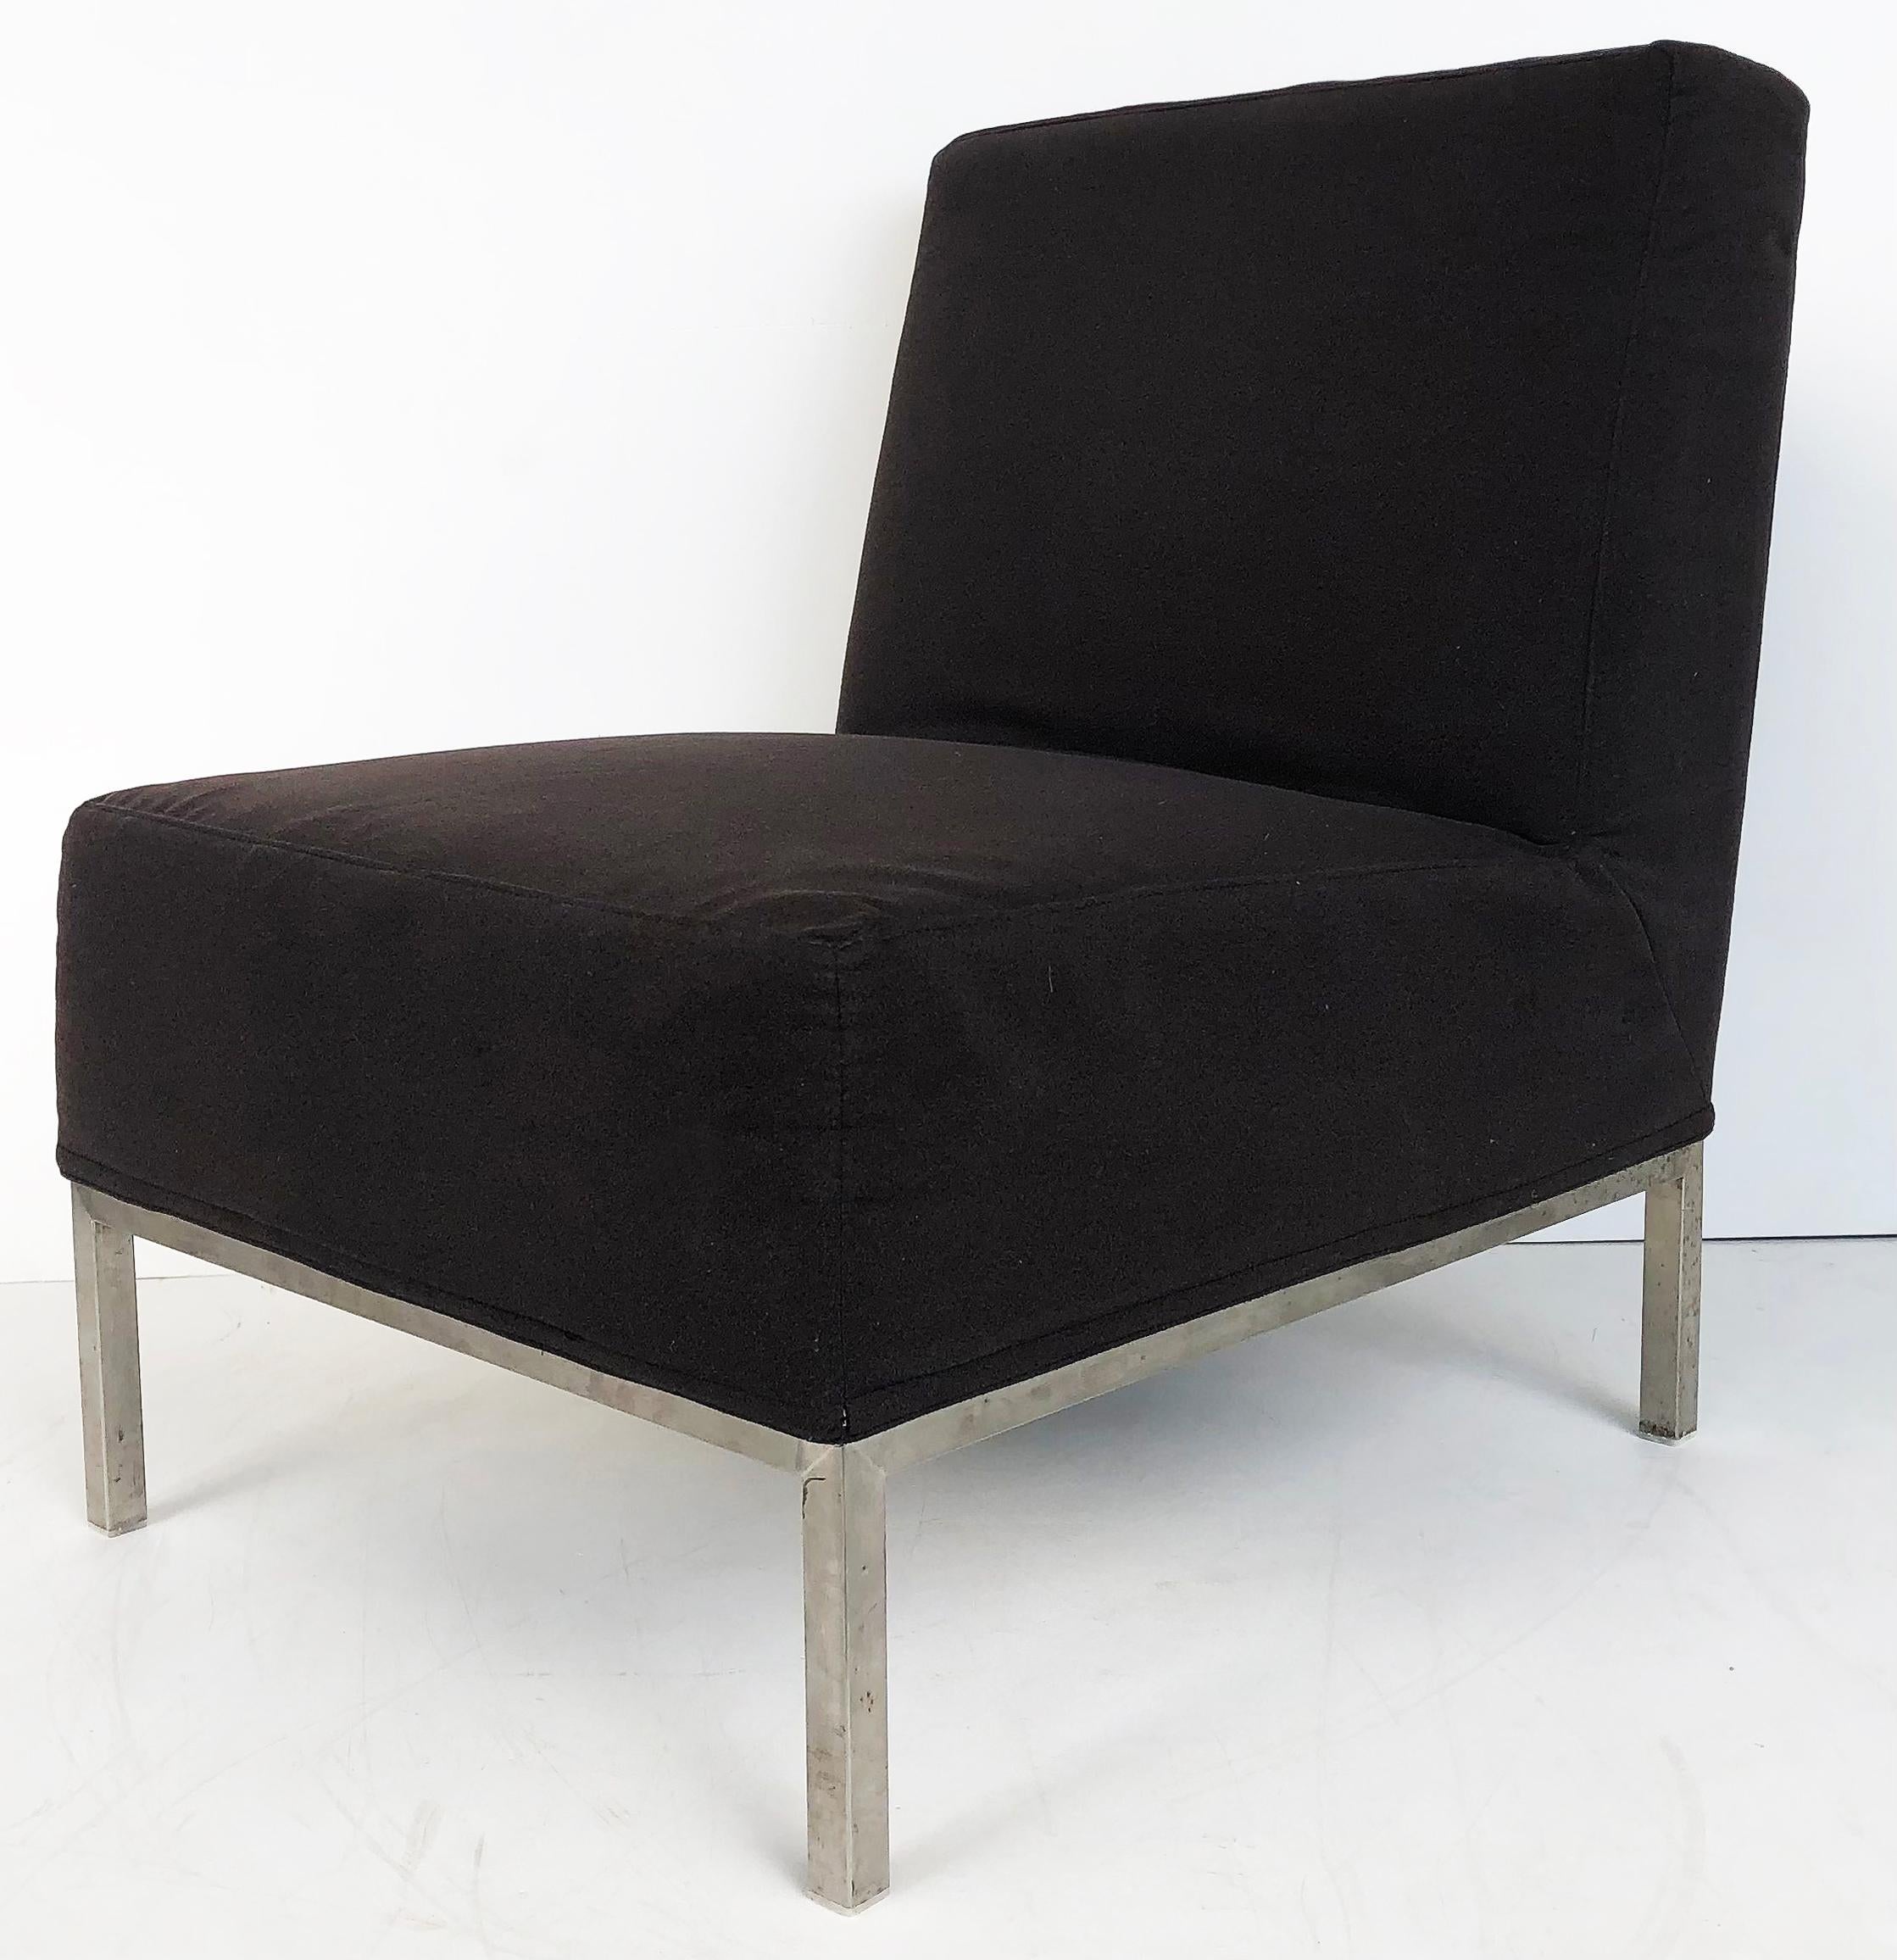 American Mid-Century Modern Slipper Chairs on Stainless Steel Frames, Pair For Sale